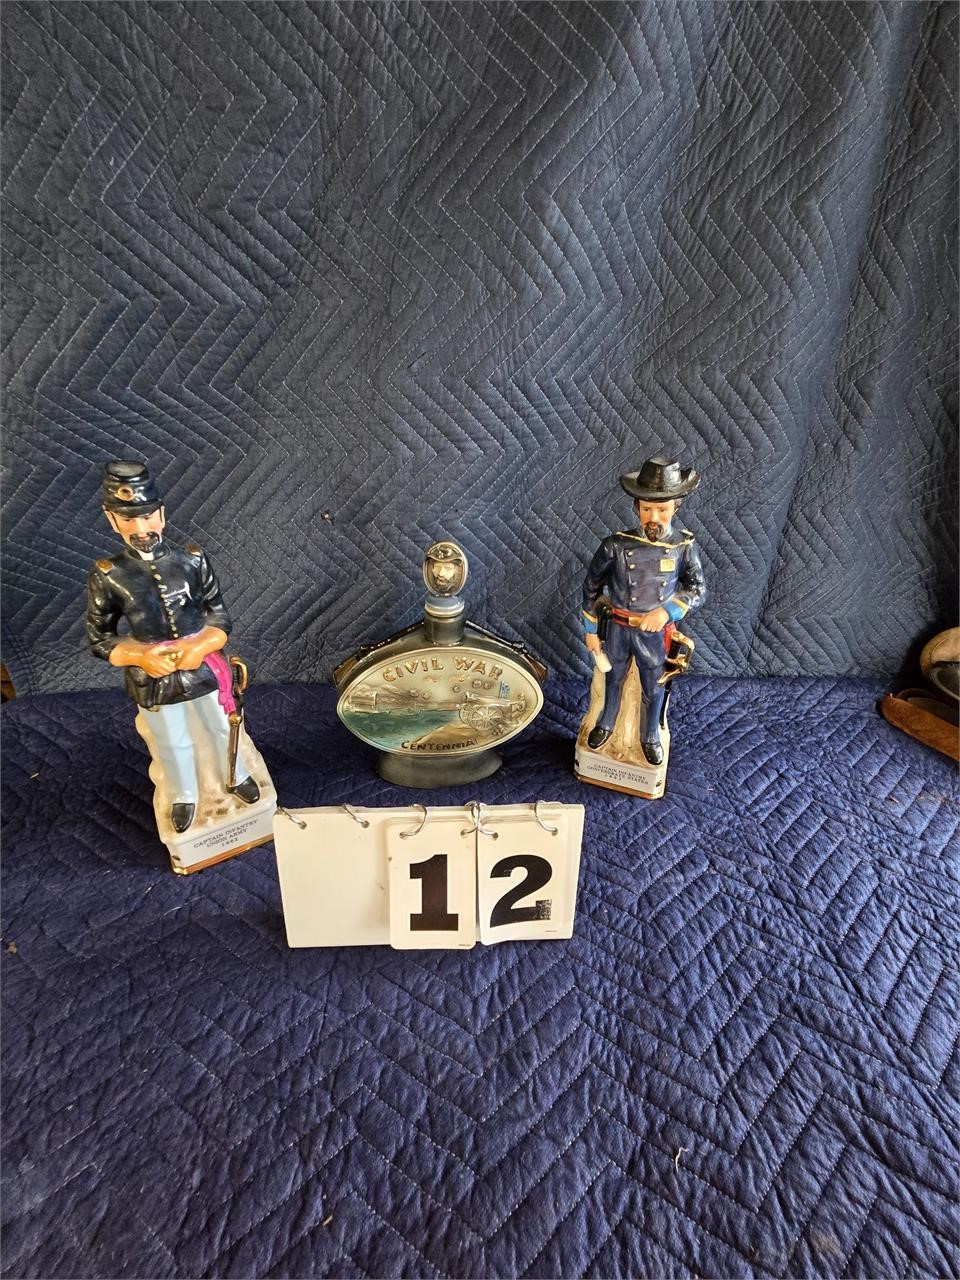 Civil War decanters one repaired